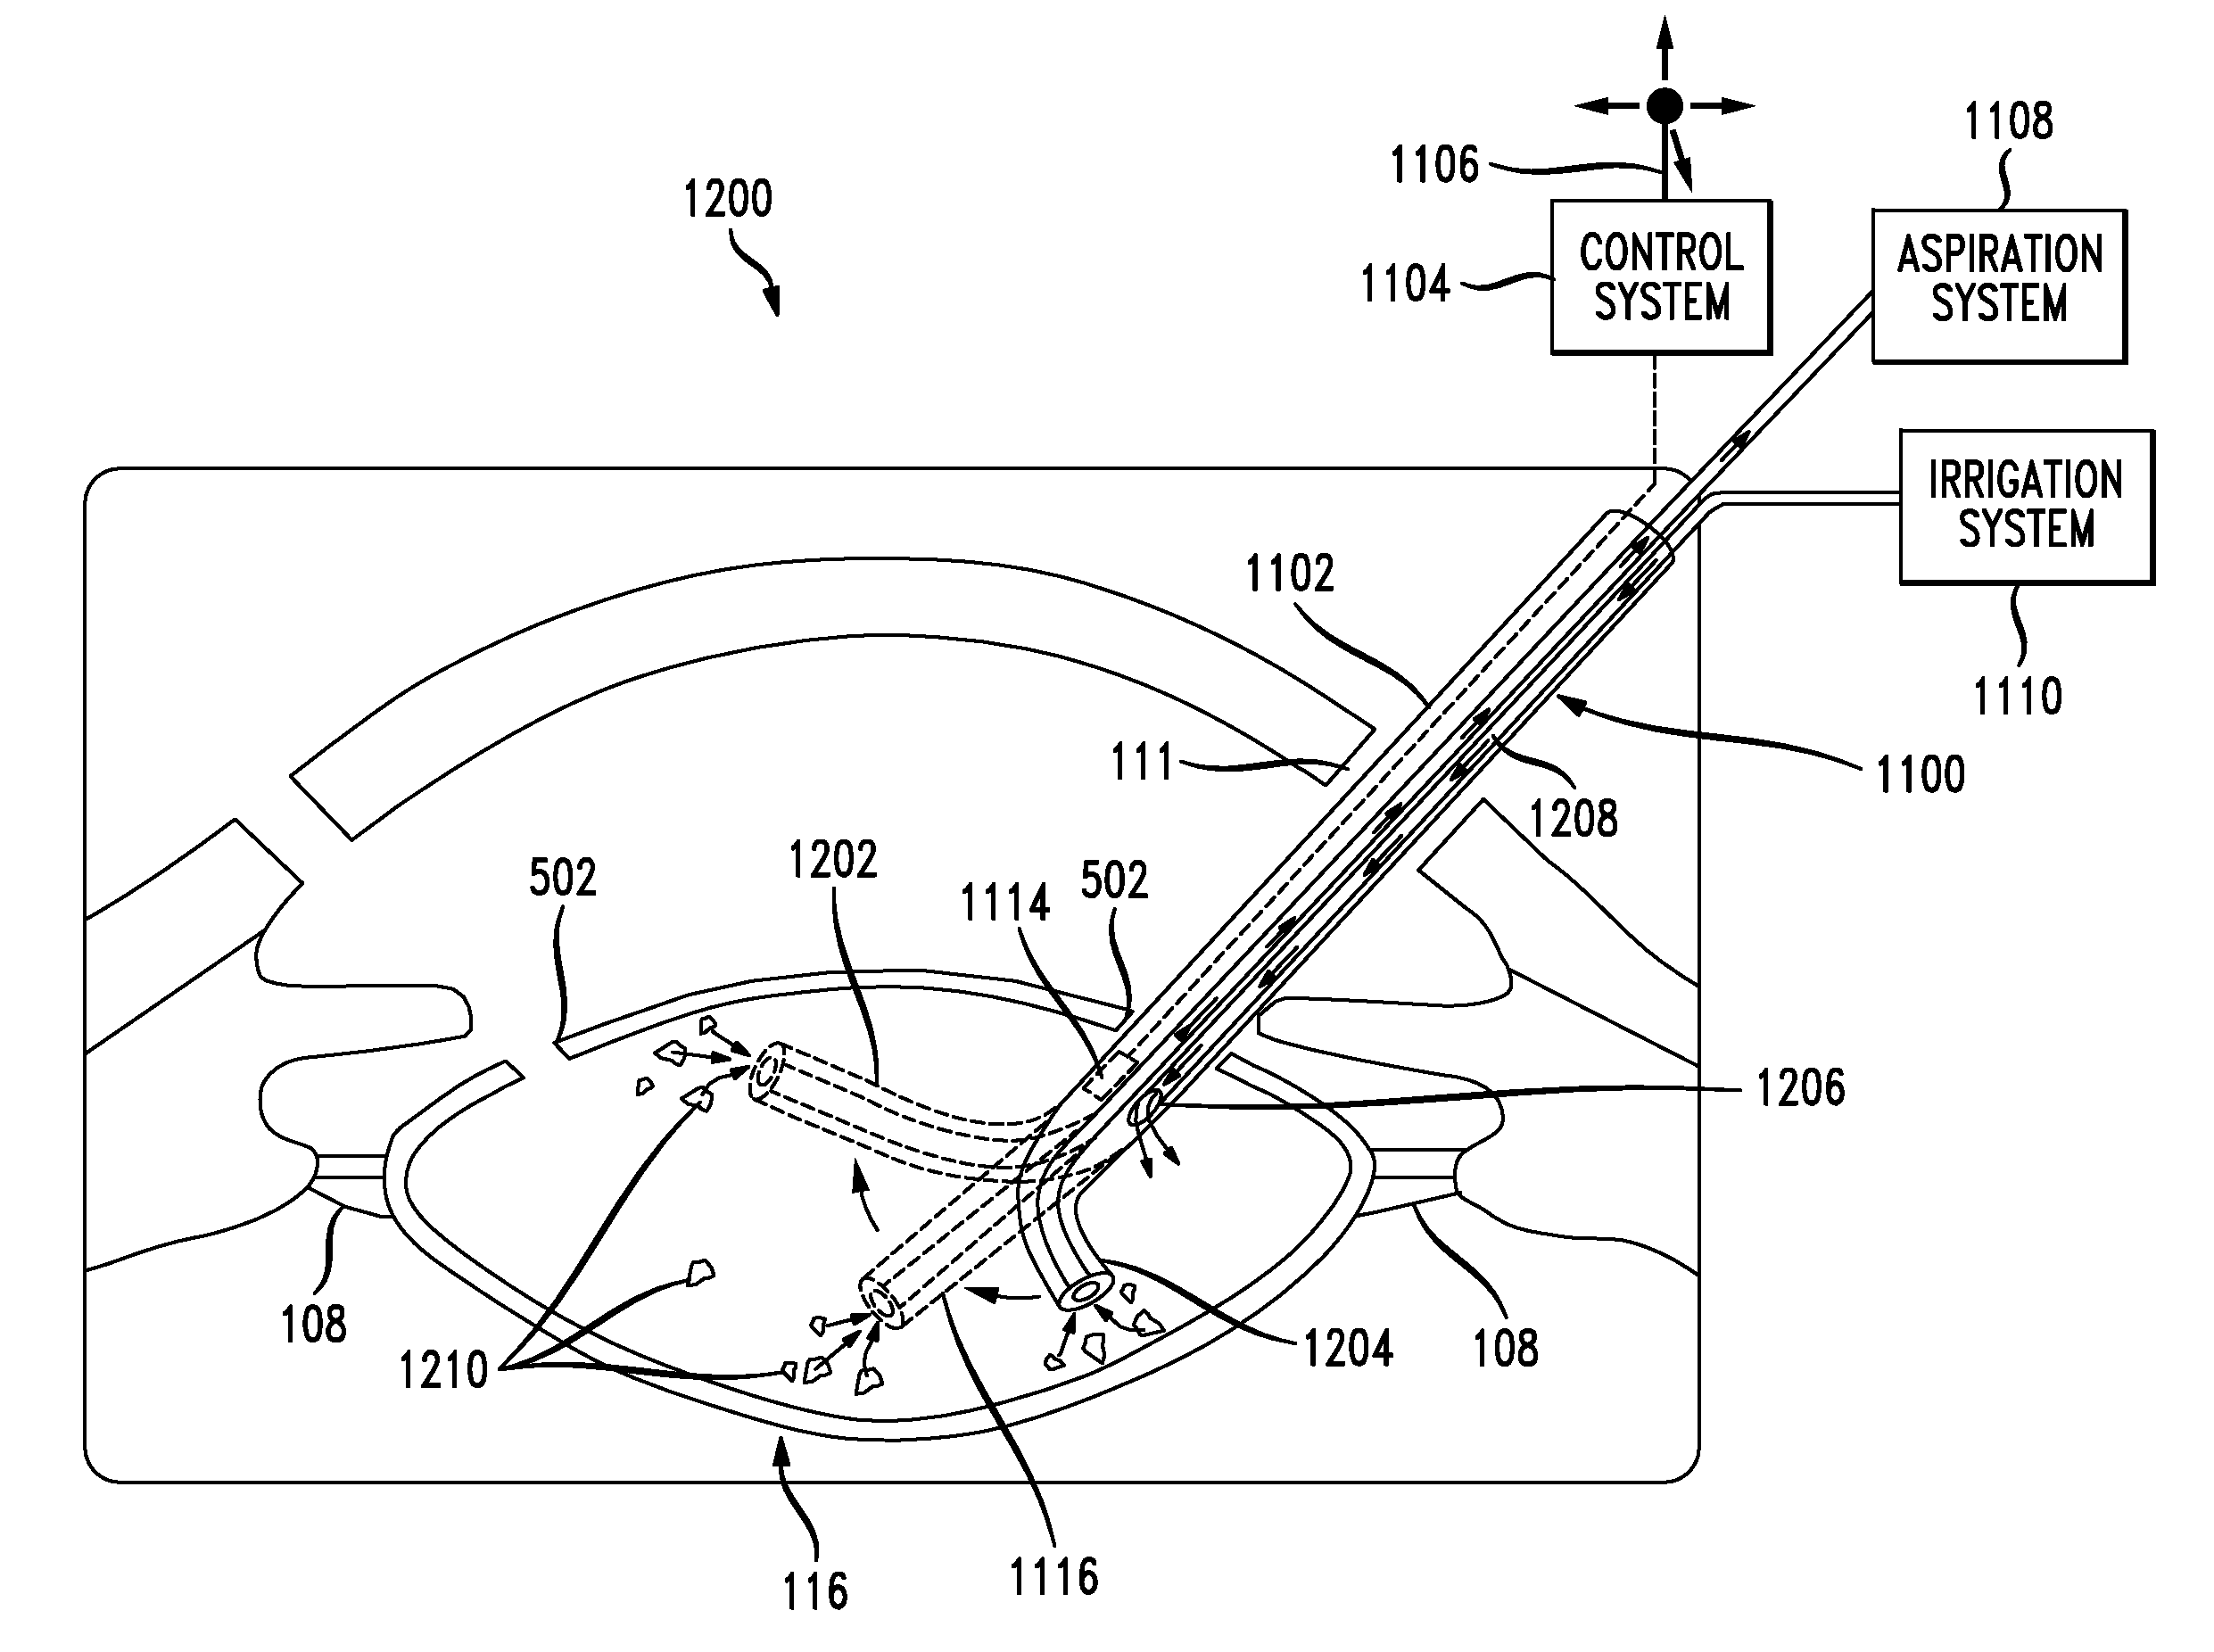 System and method of performing femtosecond laser accomodative capsulotomy